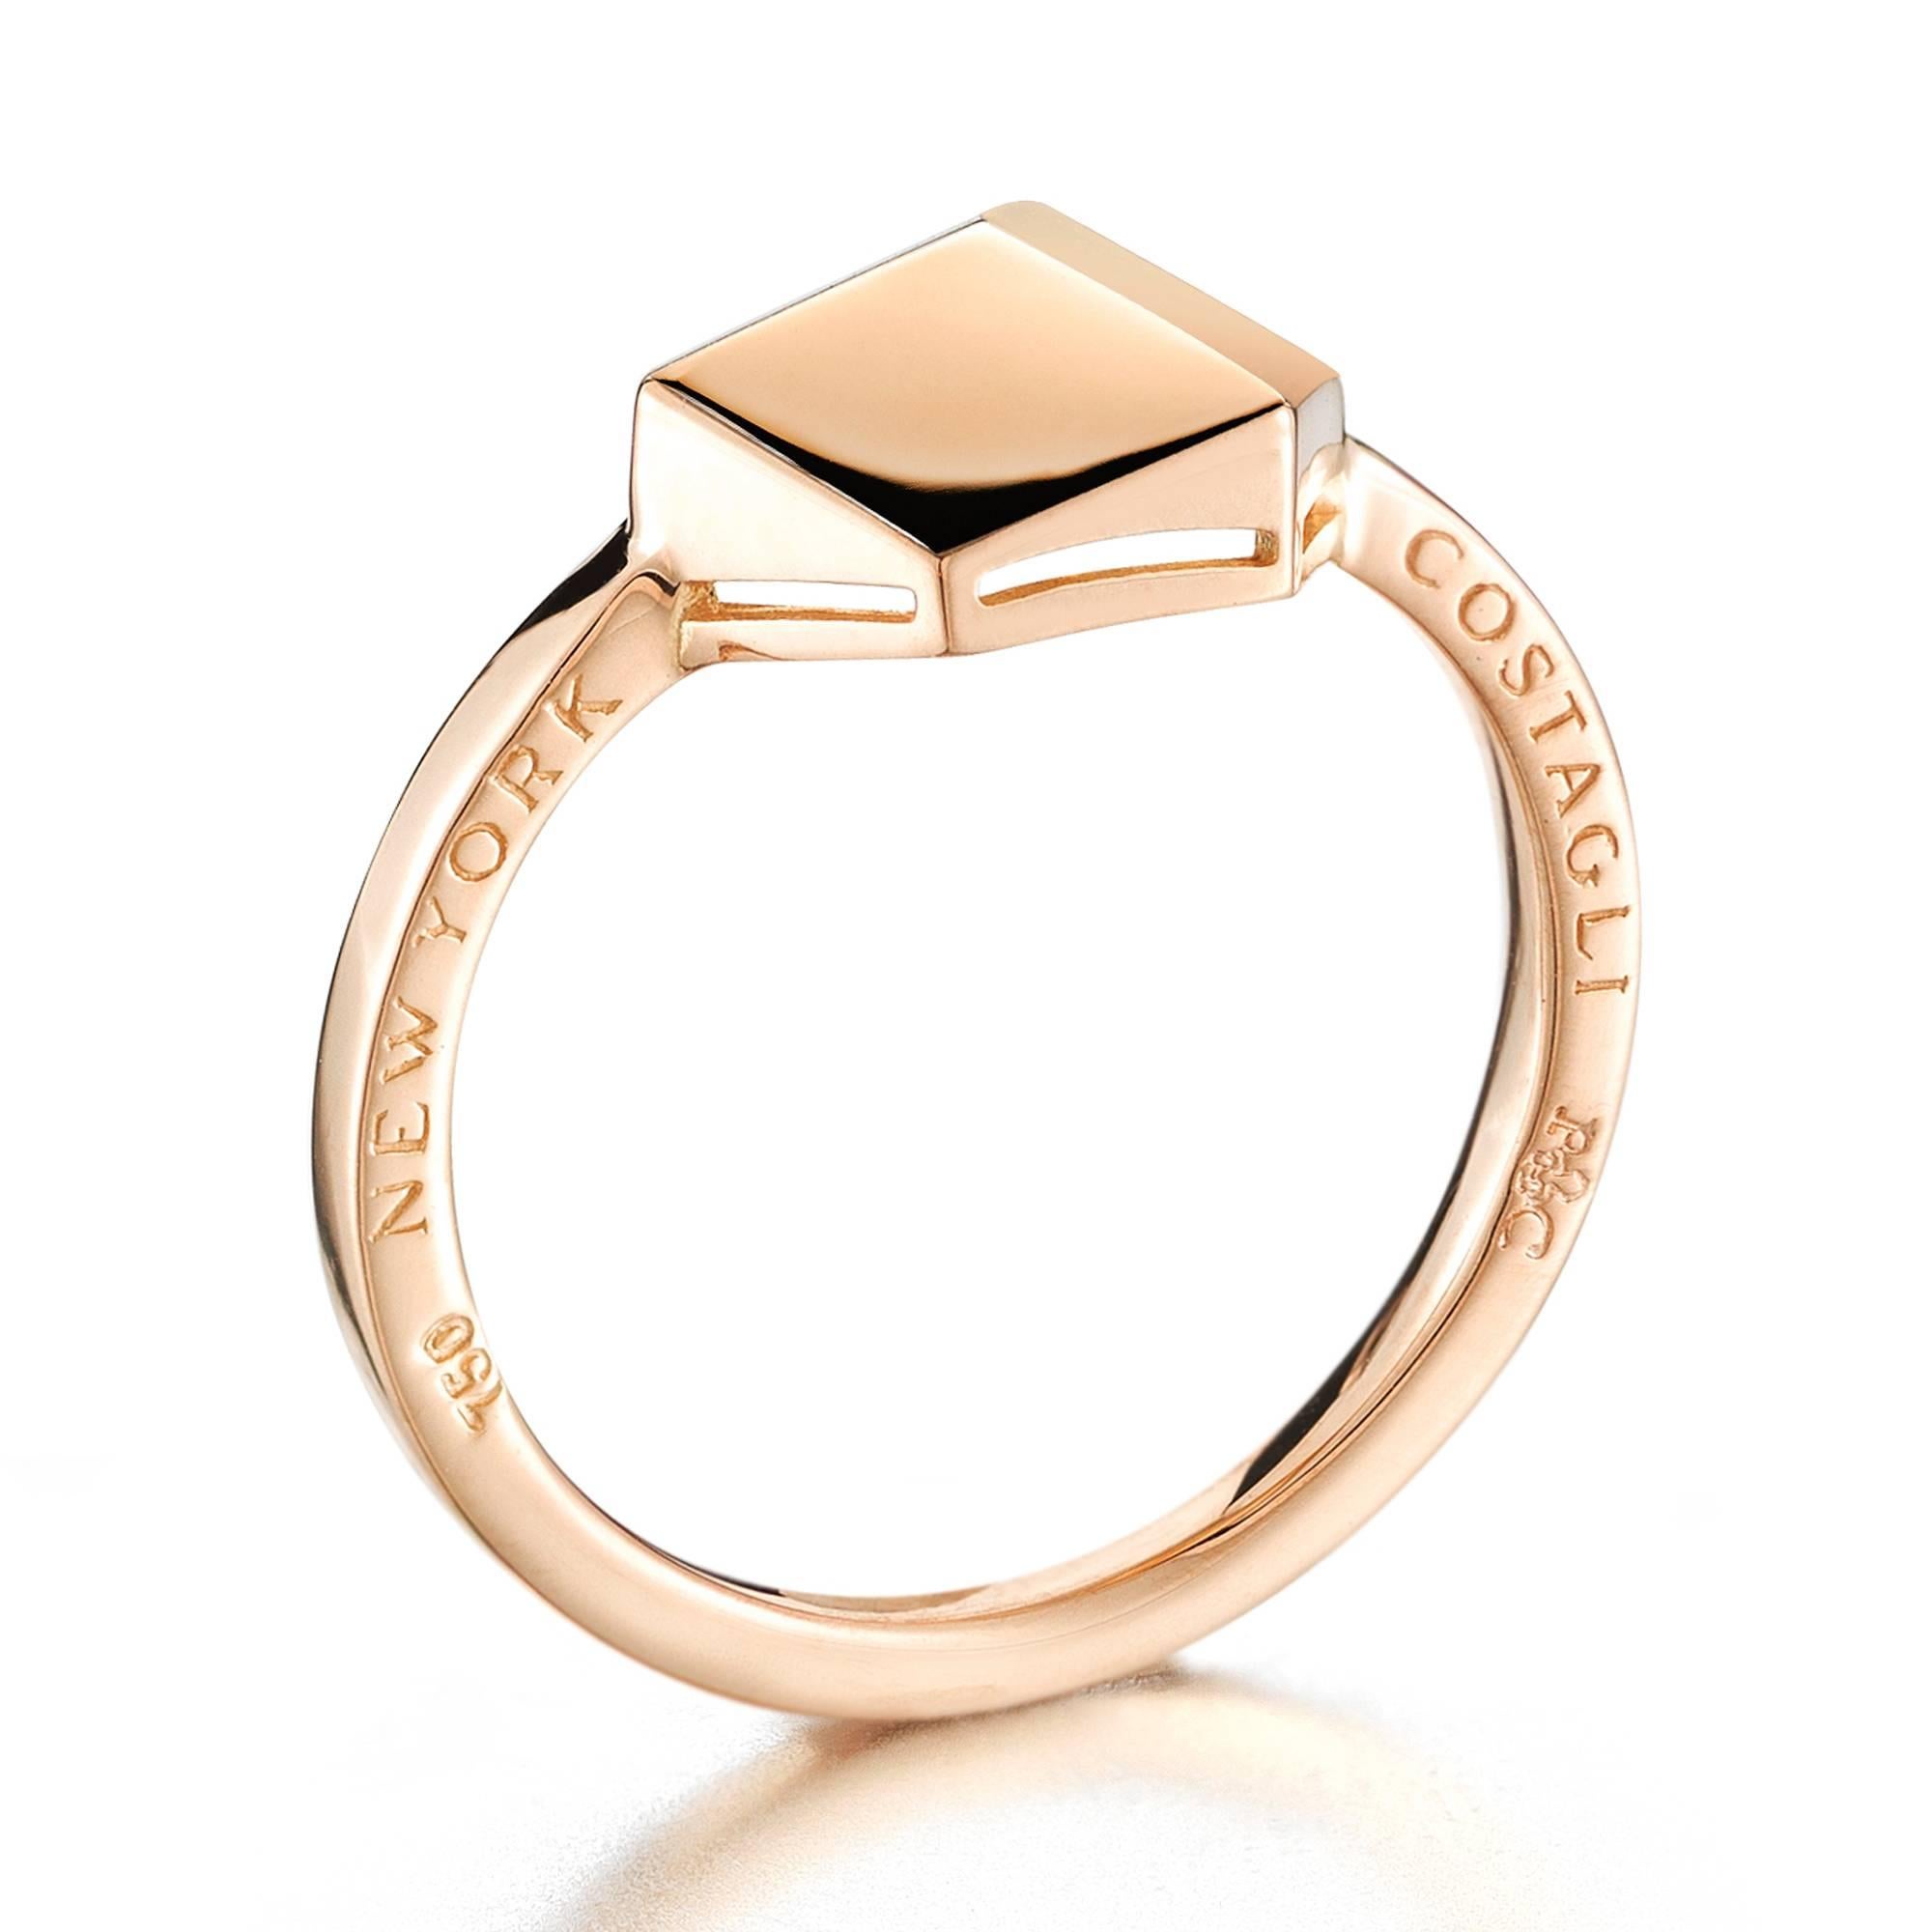 High polish 18kt rose gold Brillante® ring, petite.

Translated from a quintessential Venetian motif, the Brillante® jewelry collection combines strong jewelry design, cutting edge technology and fine engineering.  

A bracelet from this iconic and